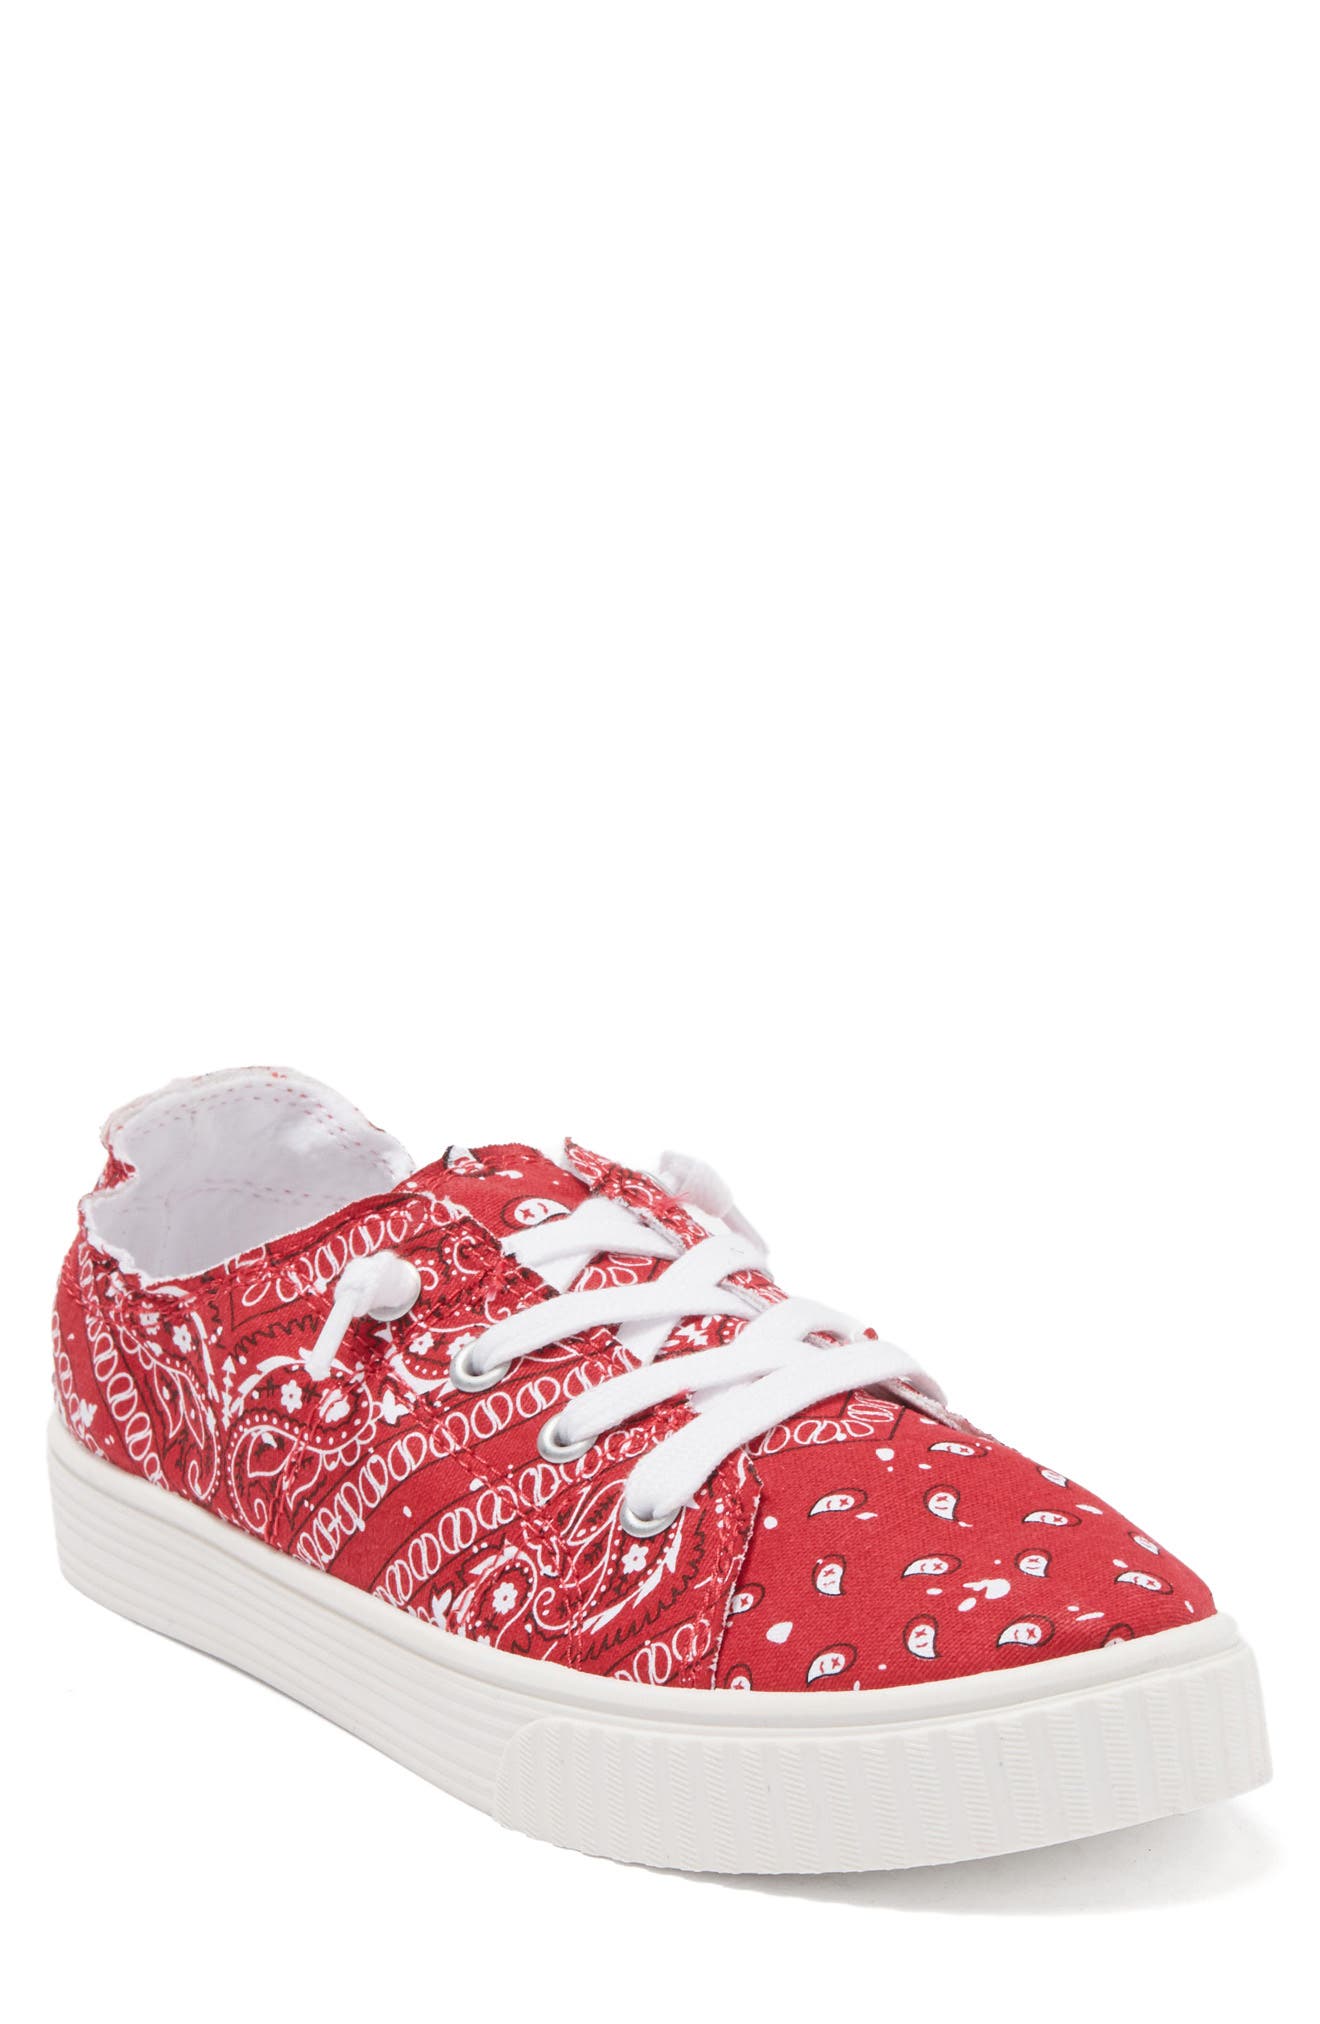 Beck Unisex Kids Bobby Low-Top Slippers